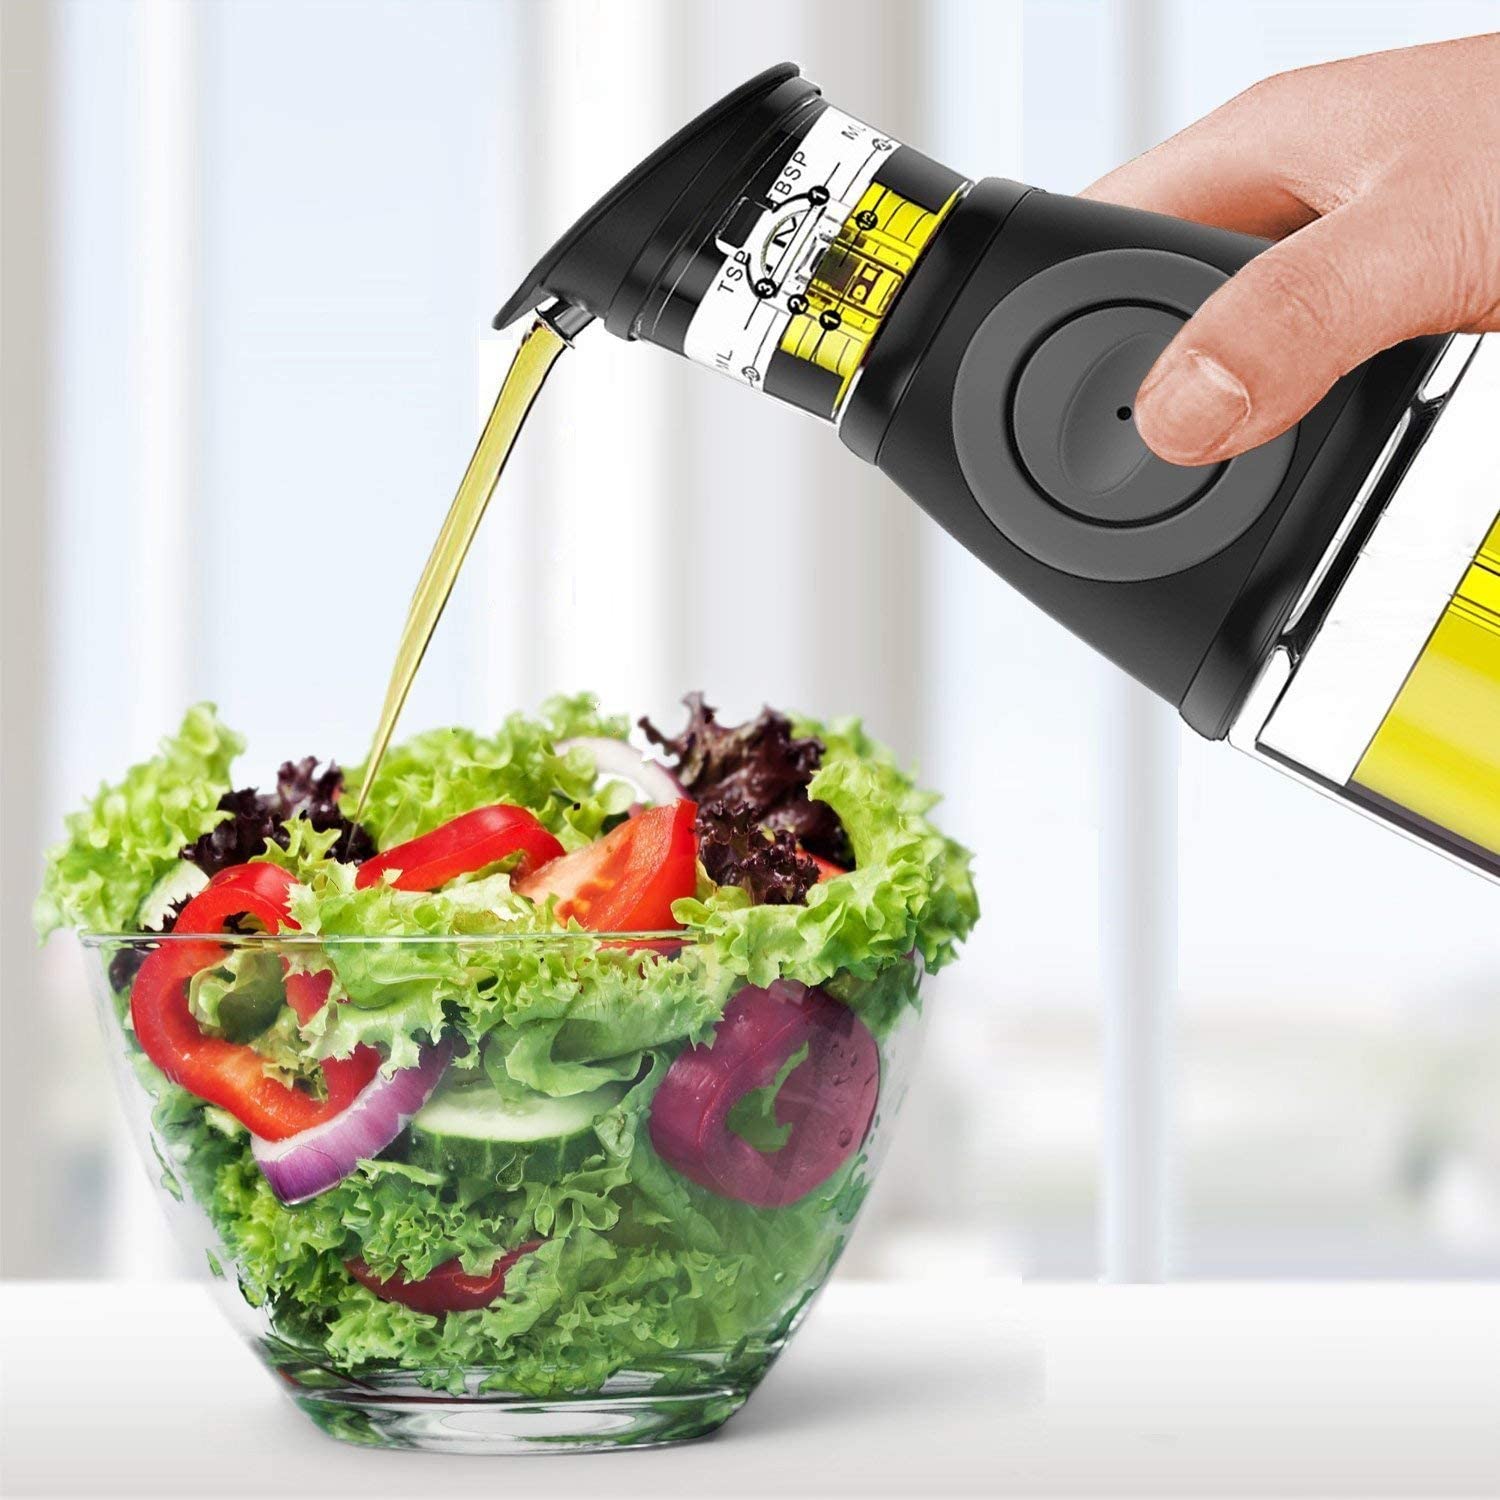 Oil & Vinegar Dispenser Set with Drip-Free Sprouts - Belwares